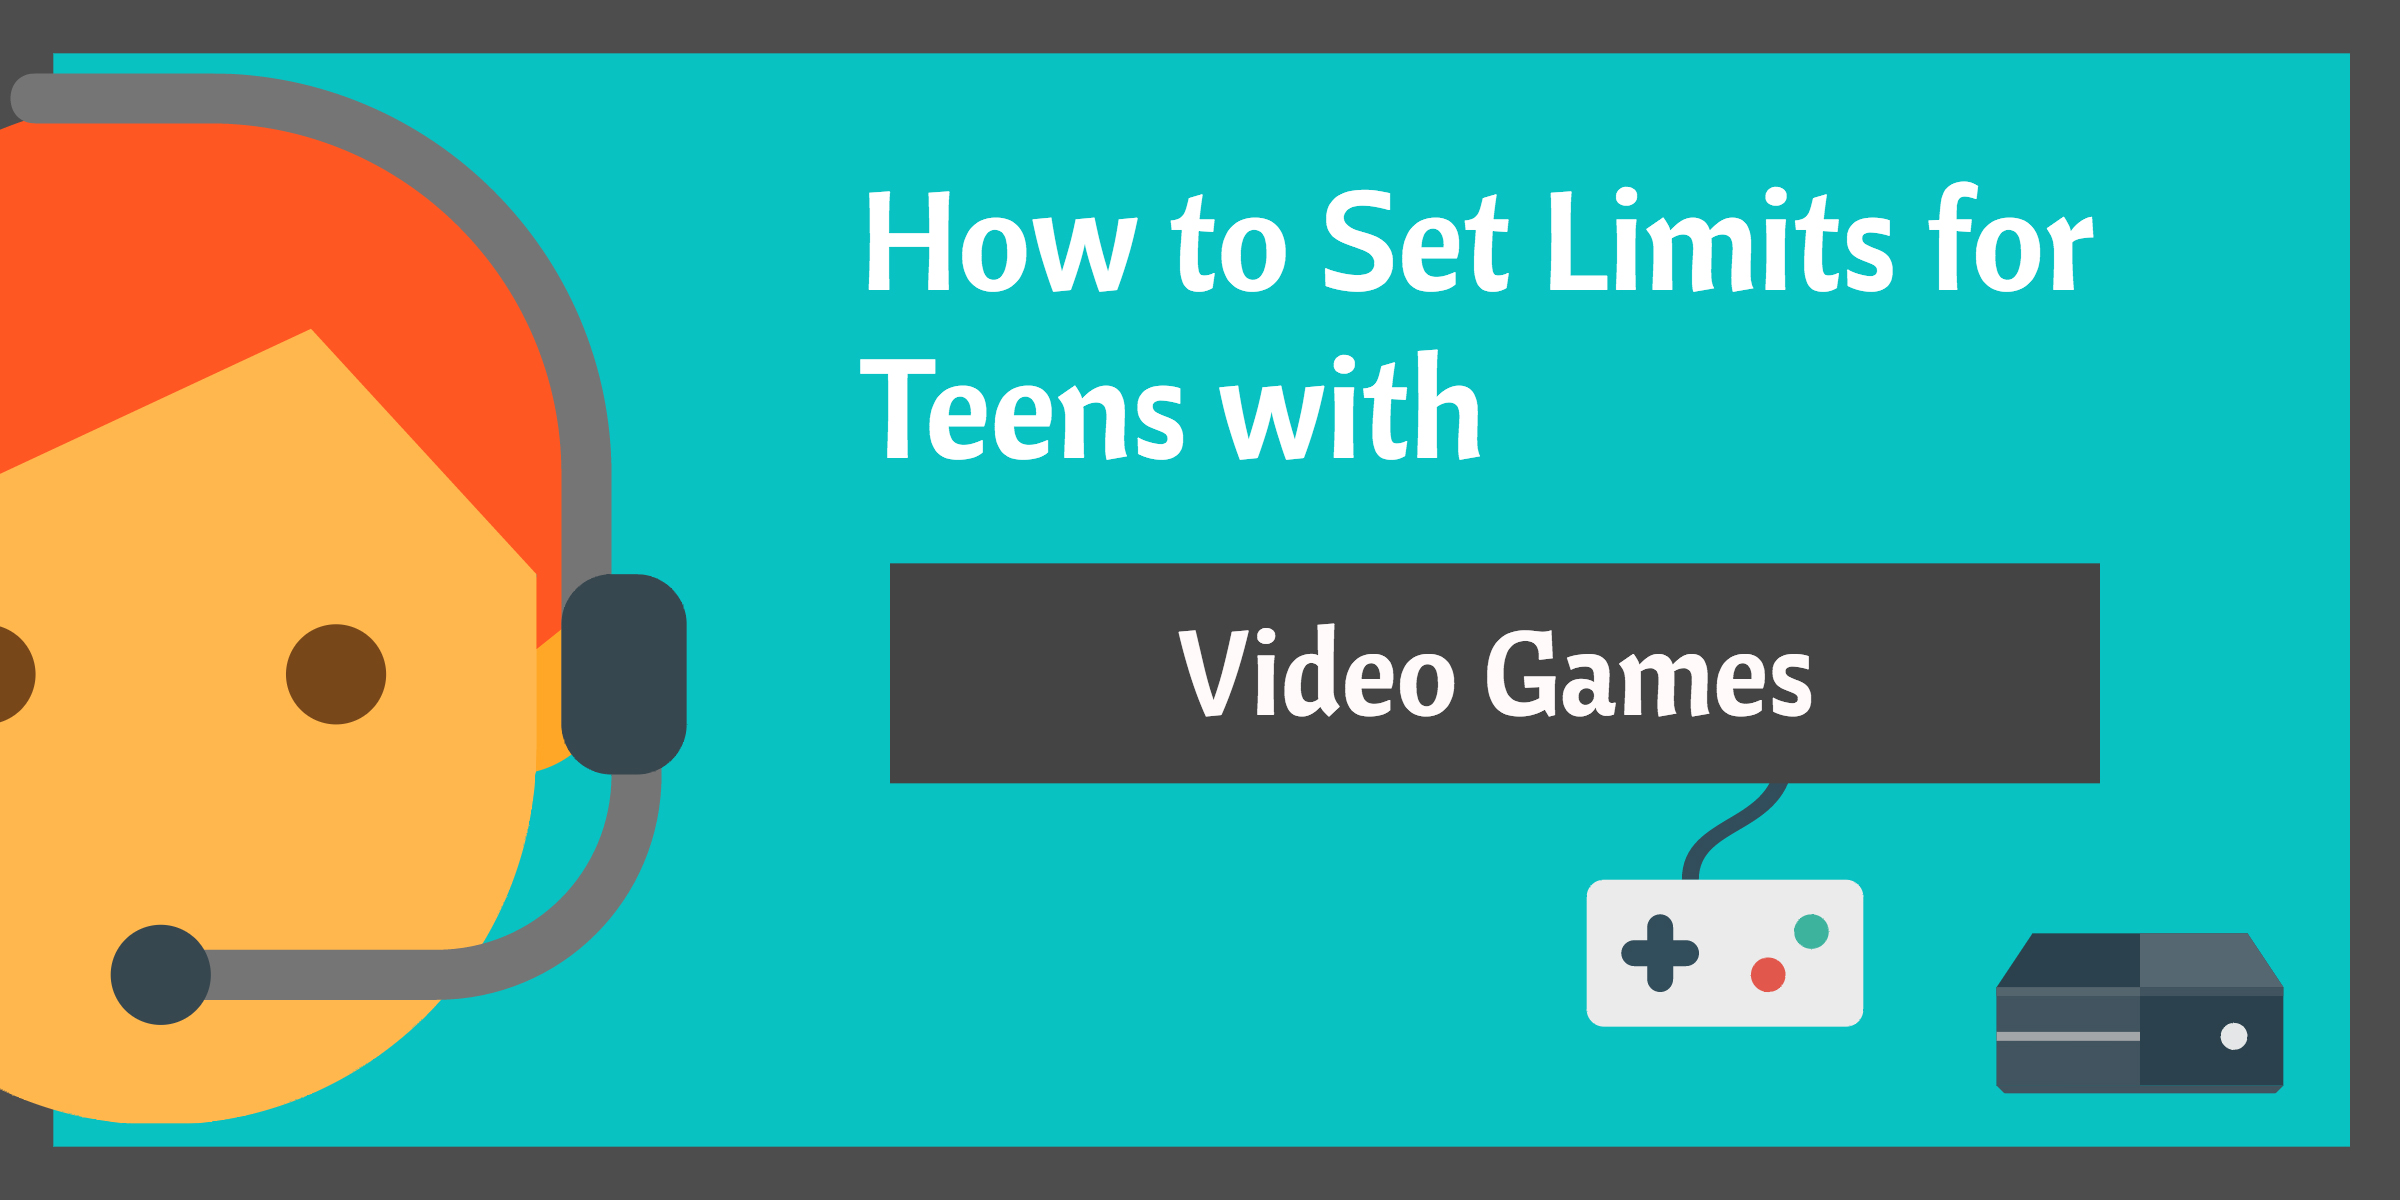 12 Tips for Setting Healthy Limits on Teenage Video Game Playing